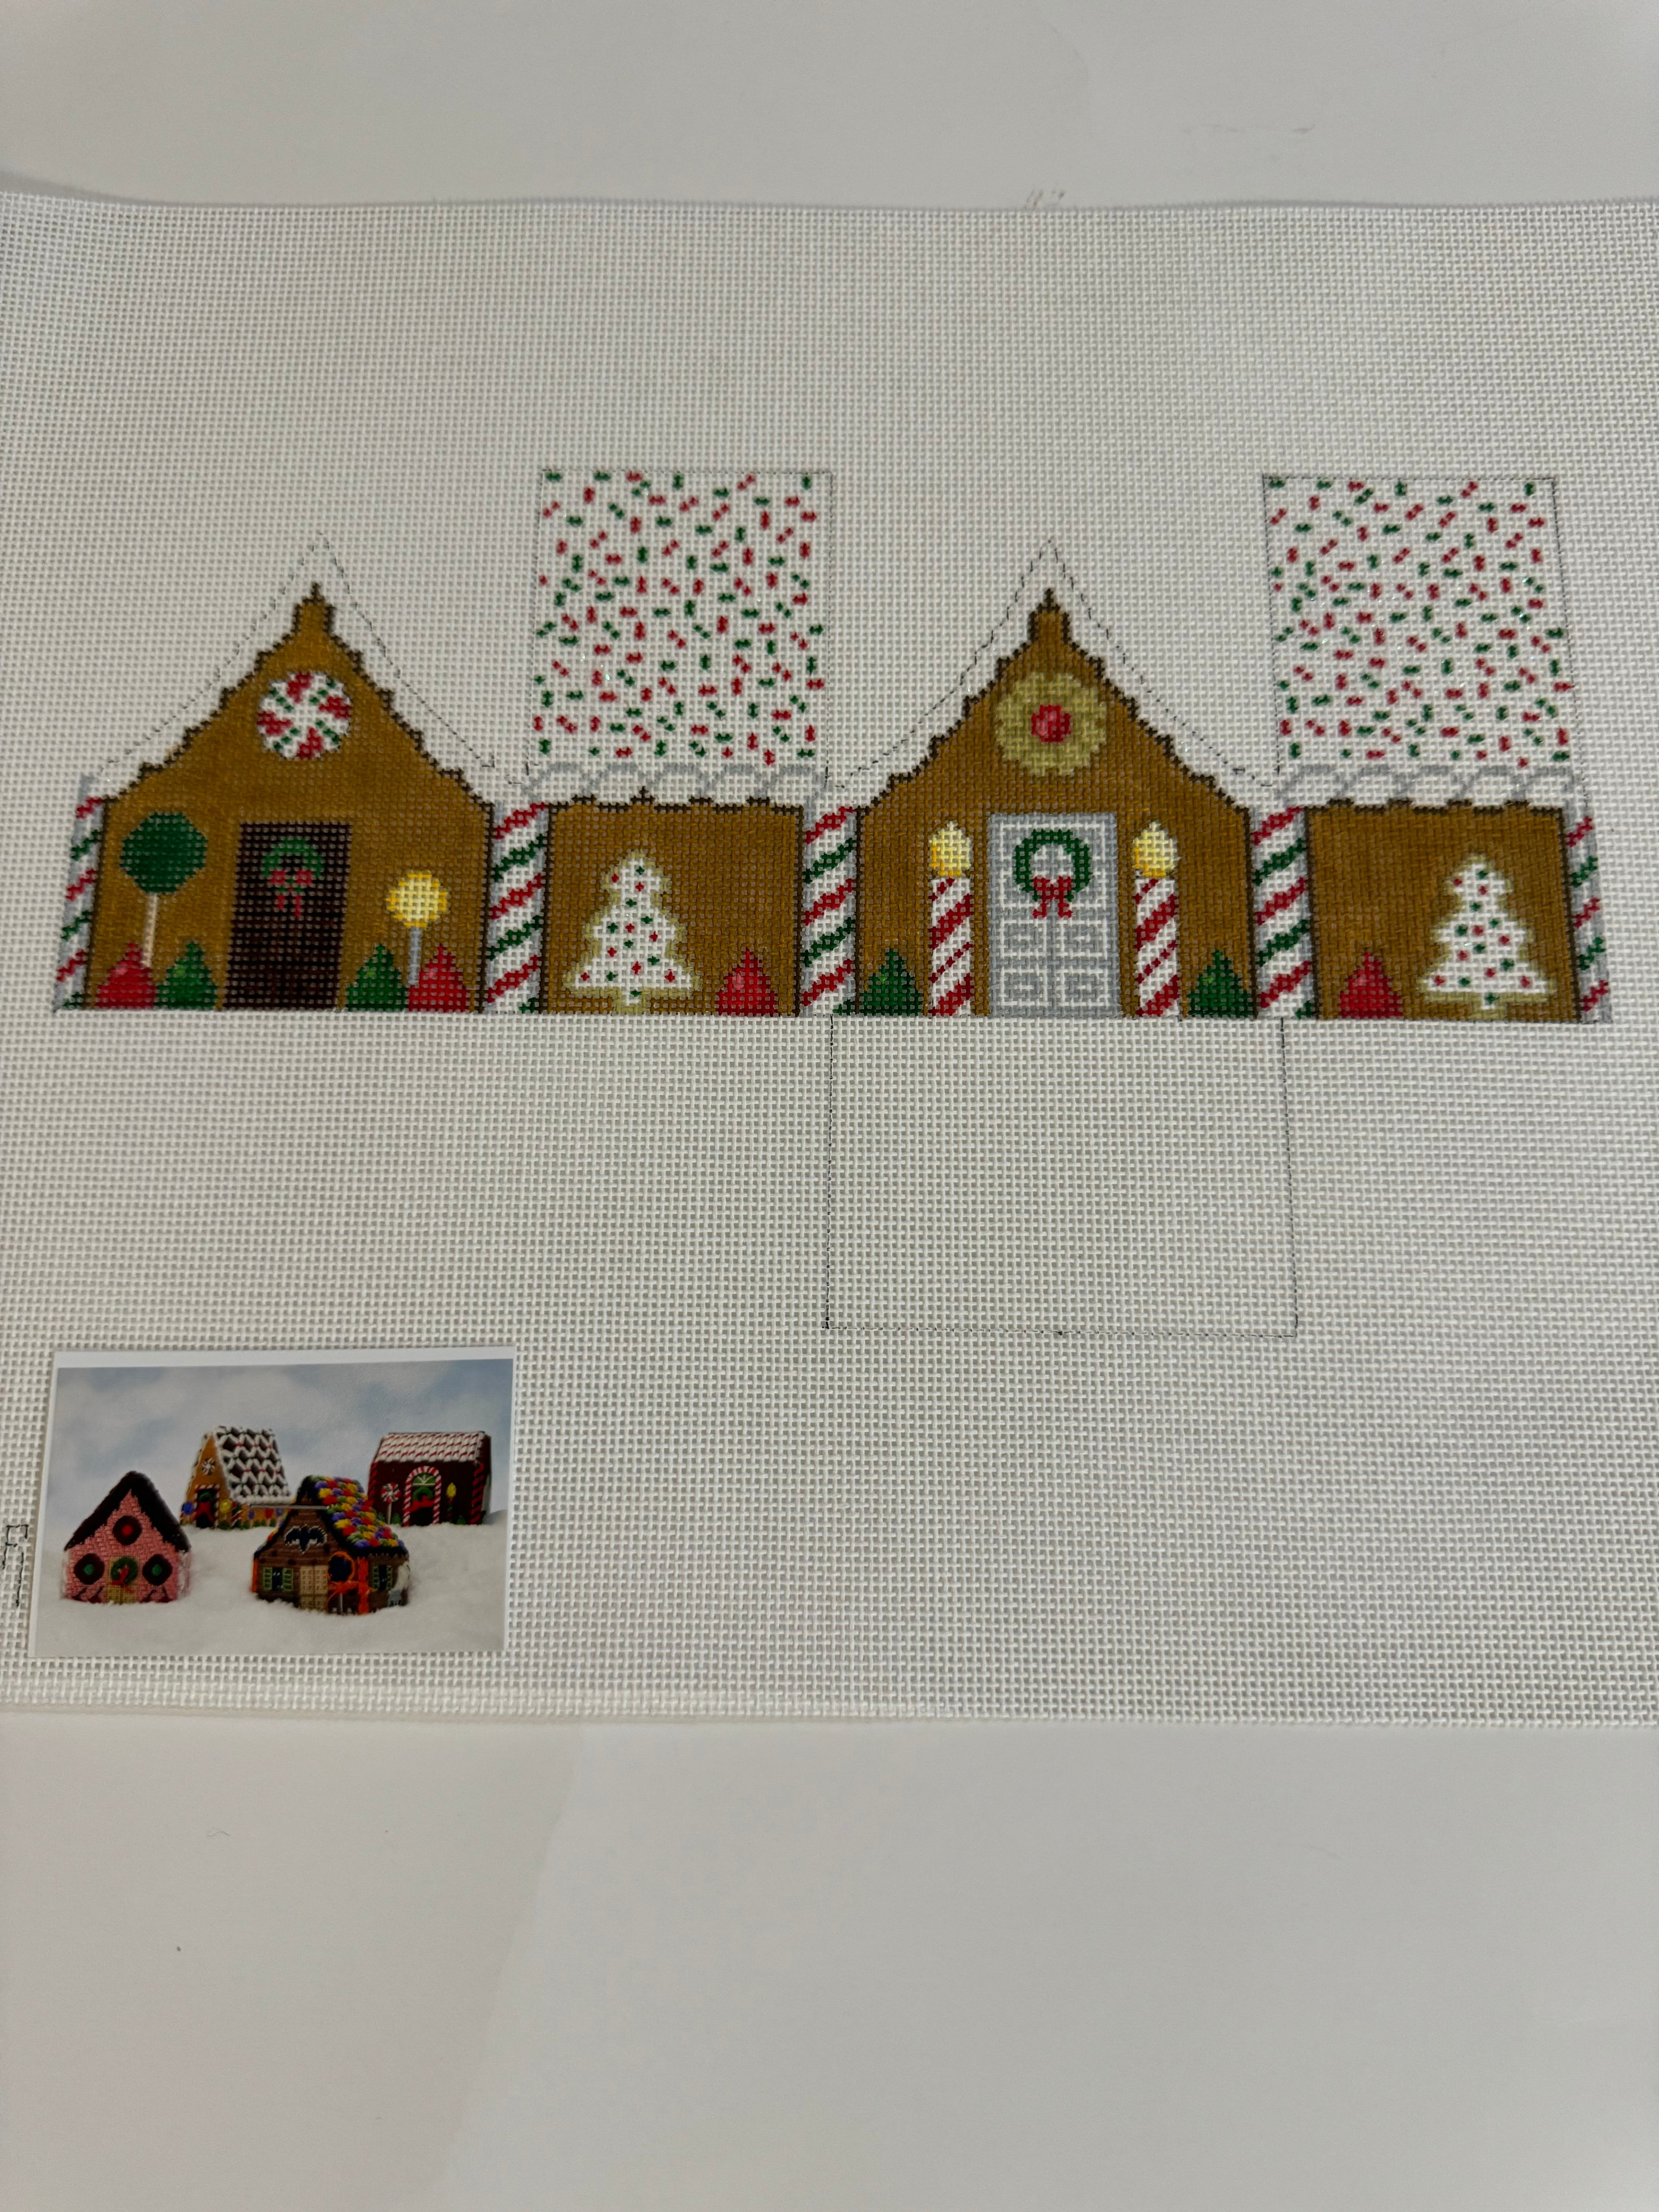 3D Red & Green Sprinkle Roof Gingerbread House - The Flying Needles